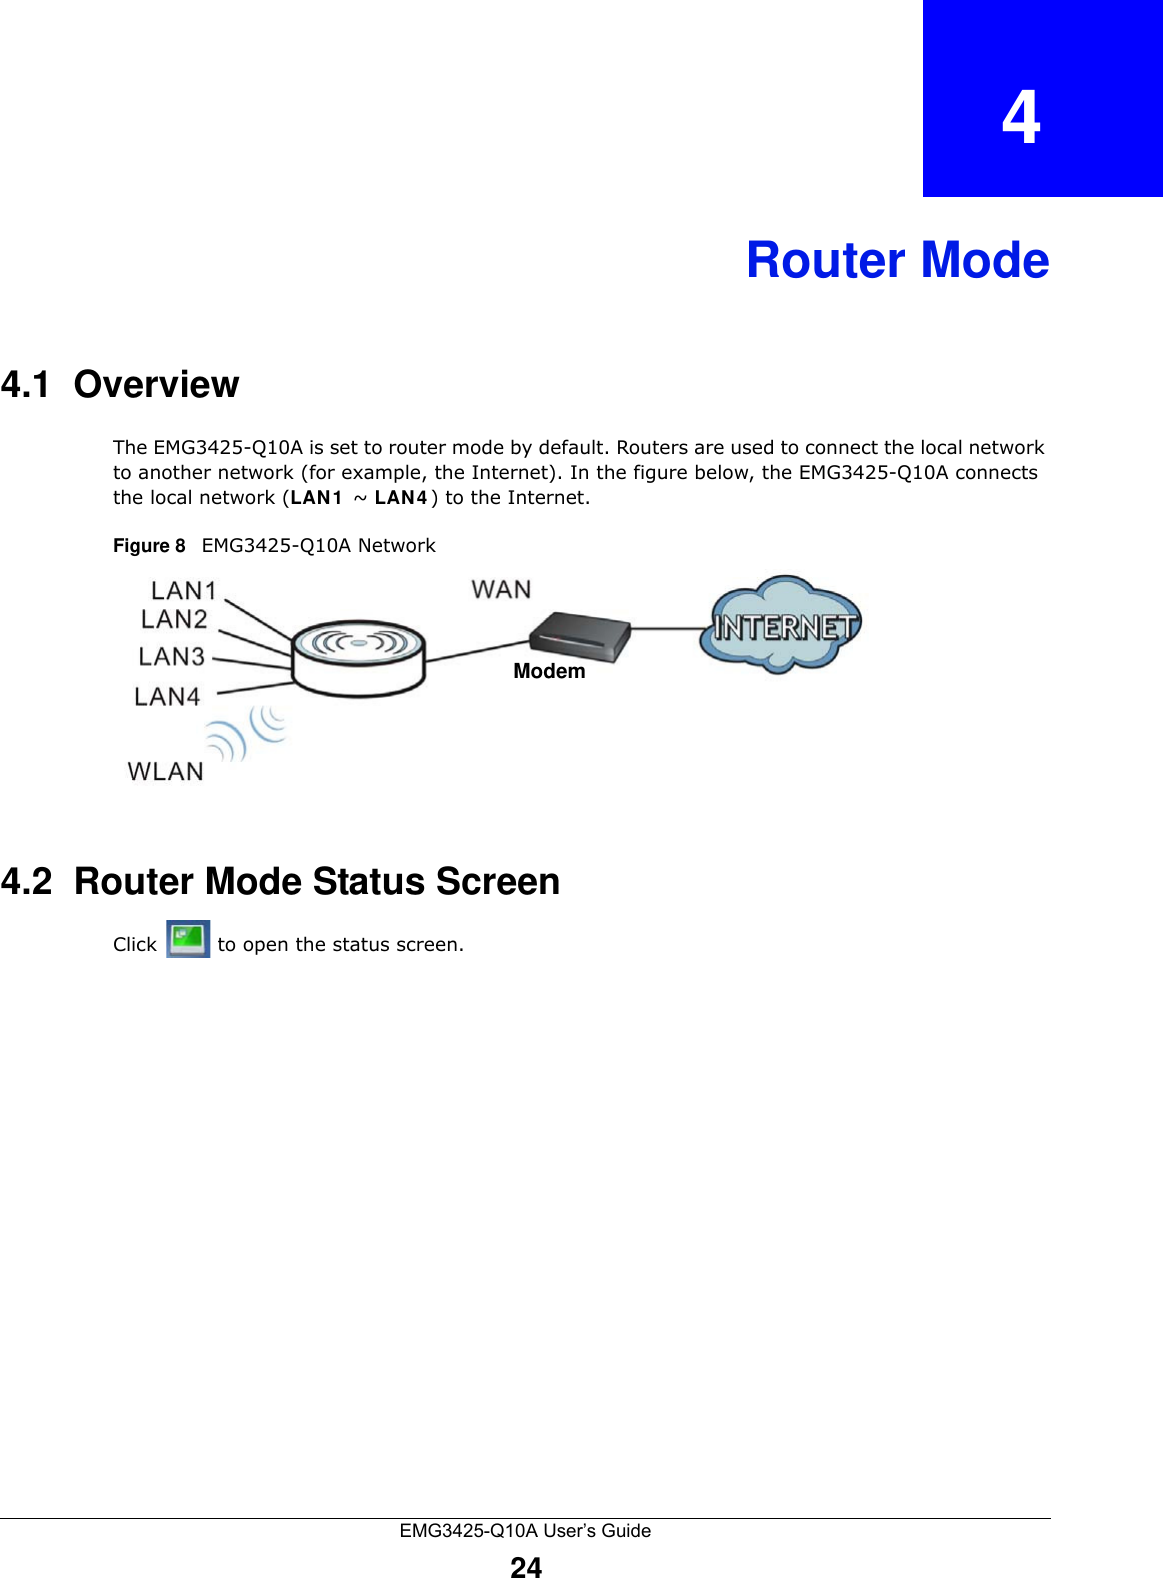 EMG3425-Q10A User’s Guide24CHAPTER   4Router Mode4.1  OverviewThe EMG3425-Q10A is set to router mode by default. Routers are used to connect the local network to another network (for example, the Internet). In the figure below, the EMG3425-Q10A connects the local network (LAN 1  ~ LAN 4 ) to the Internet.Figure 8   EMG3425-Q10A Network4.2  Router Mode Status ScreenClick   to open the status screen. Modem